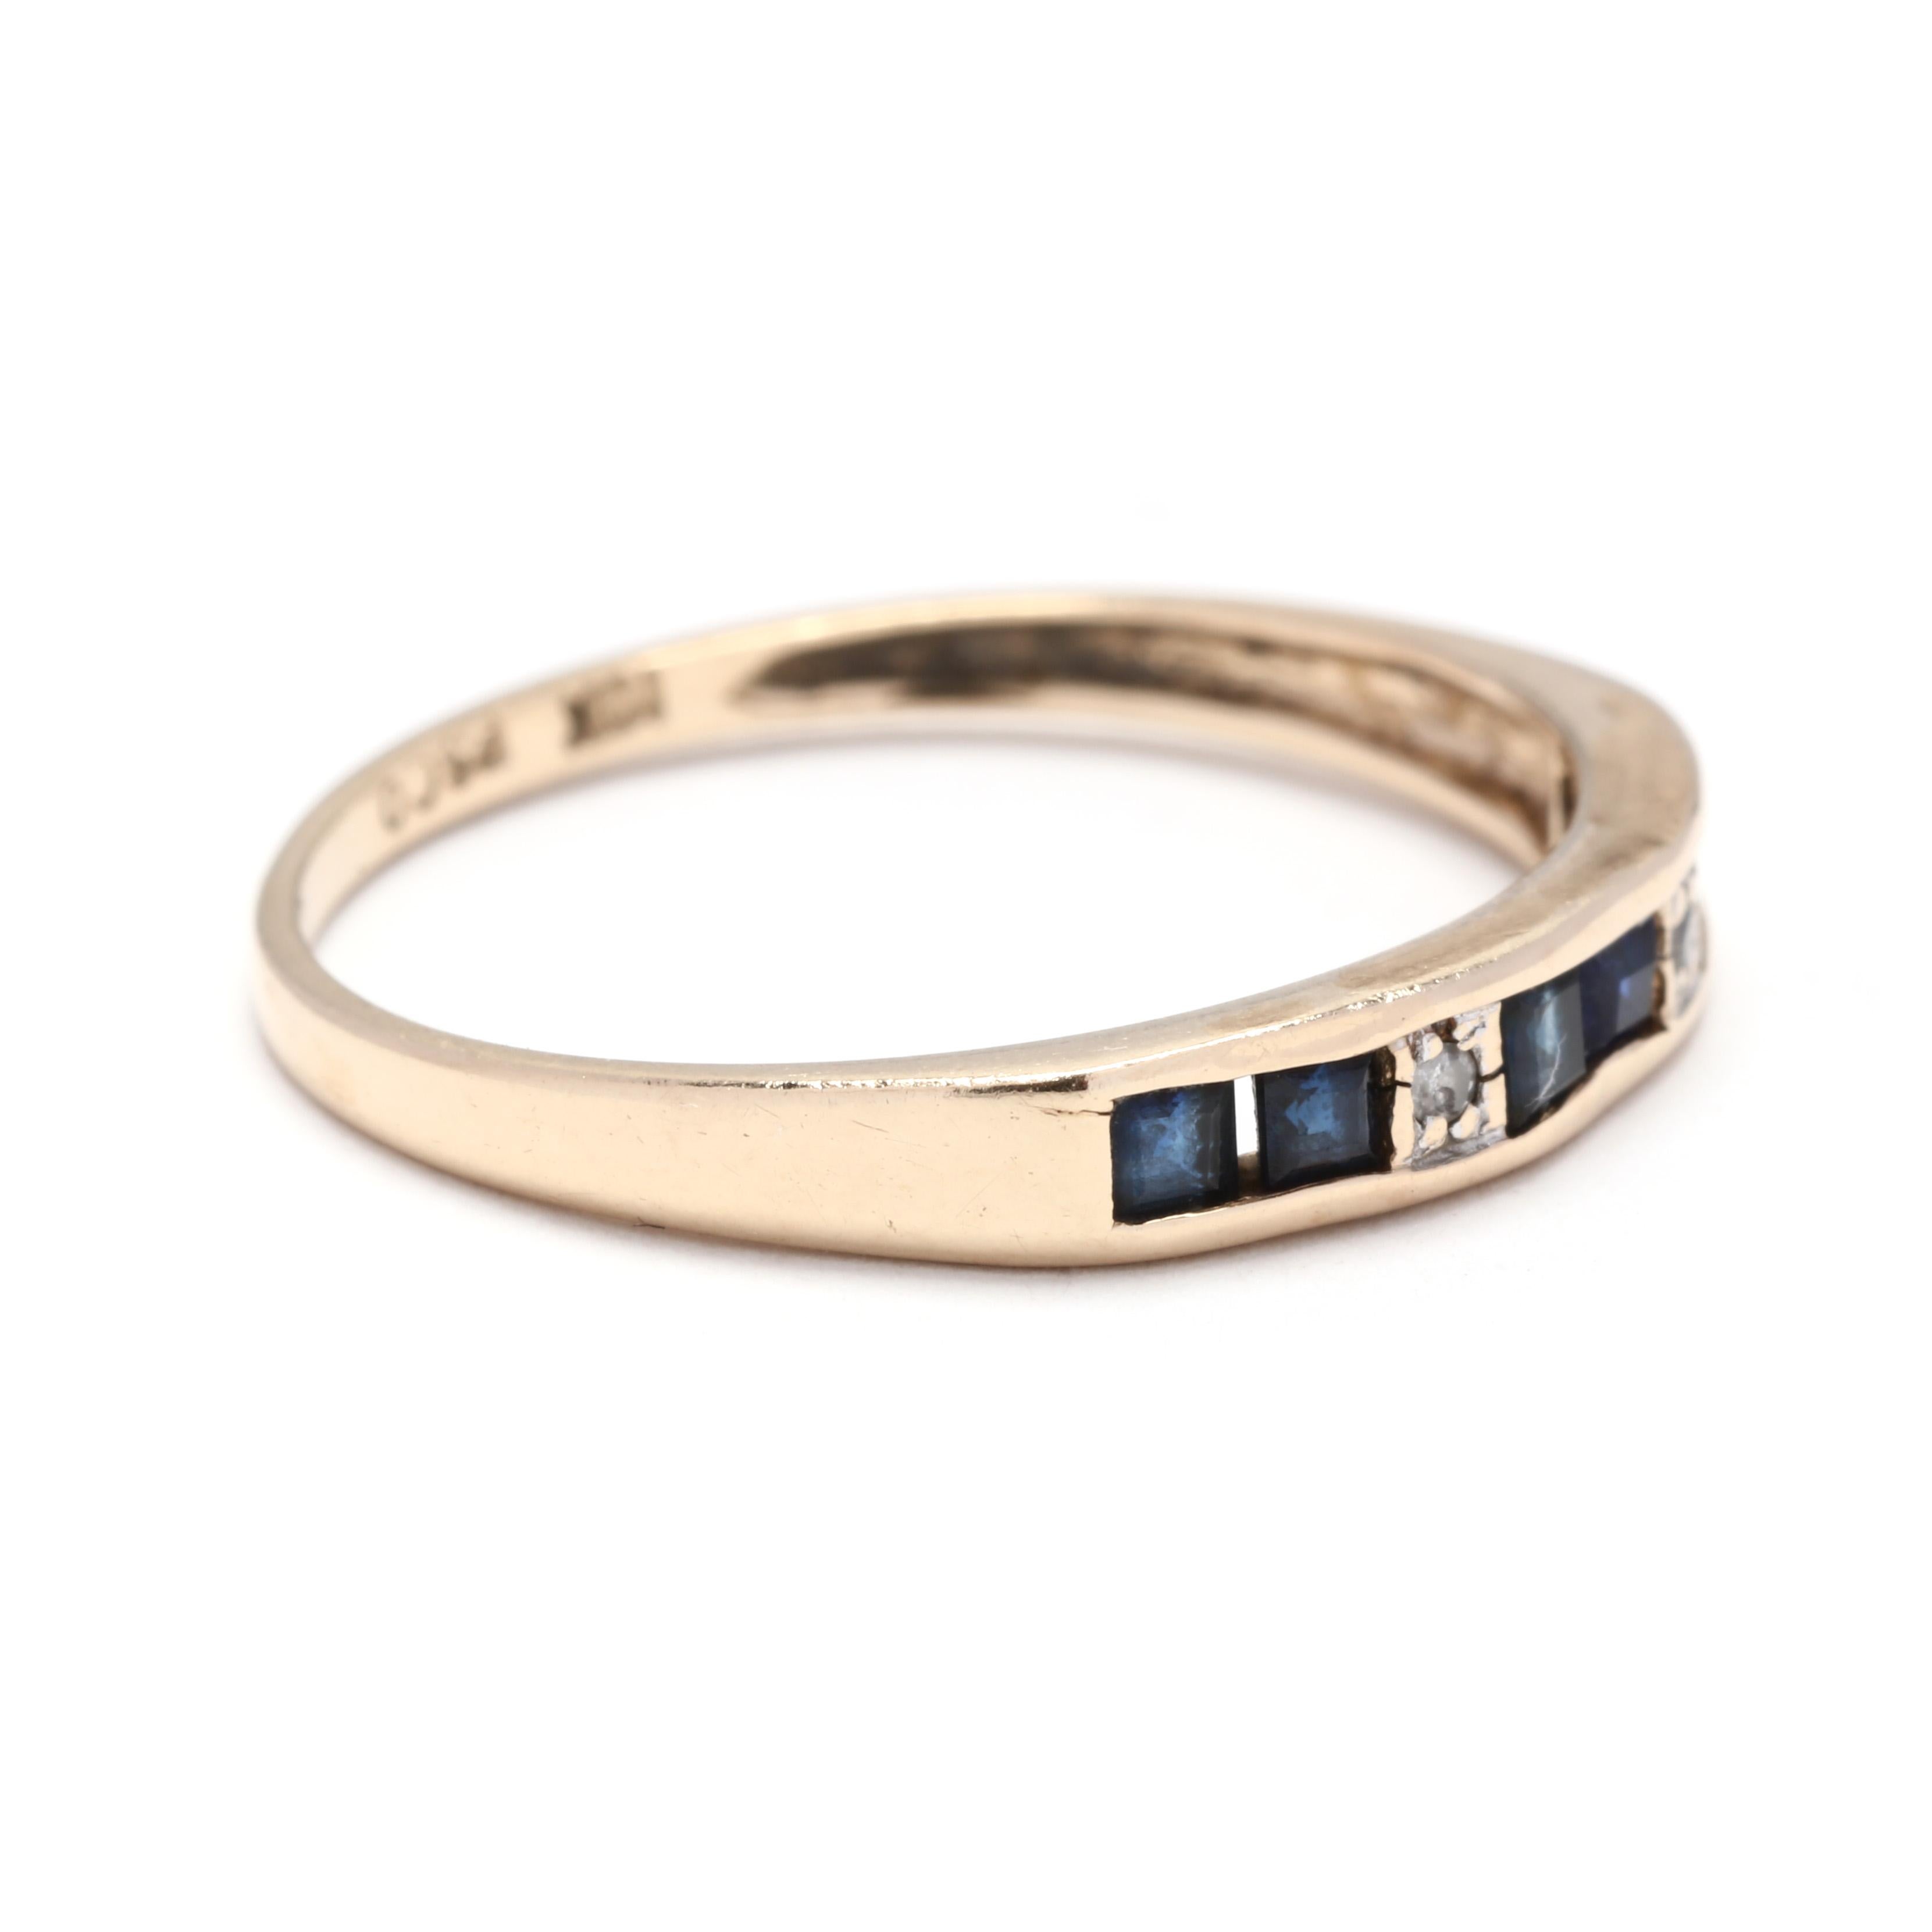 A 10 karat yellow gold, sapphire and diamond stackable band ring. A thin band with six channel set square cut sapphires weighing approximately .36 total carats, with two full cut round diamonds in between and a thin tapered band.

Stones:
-